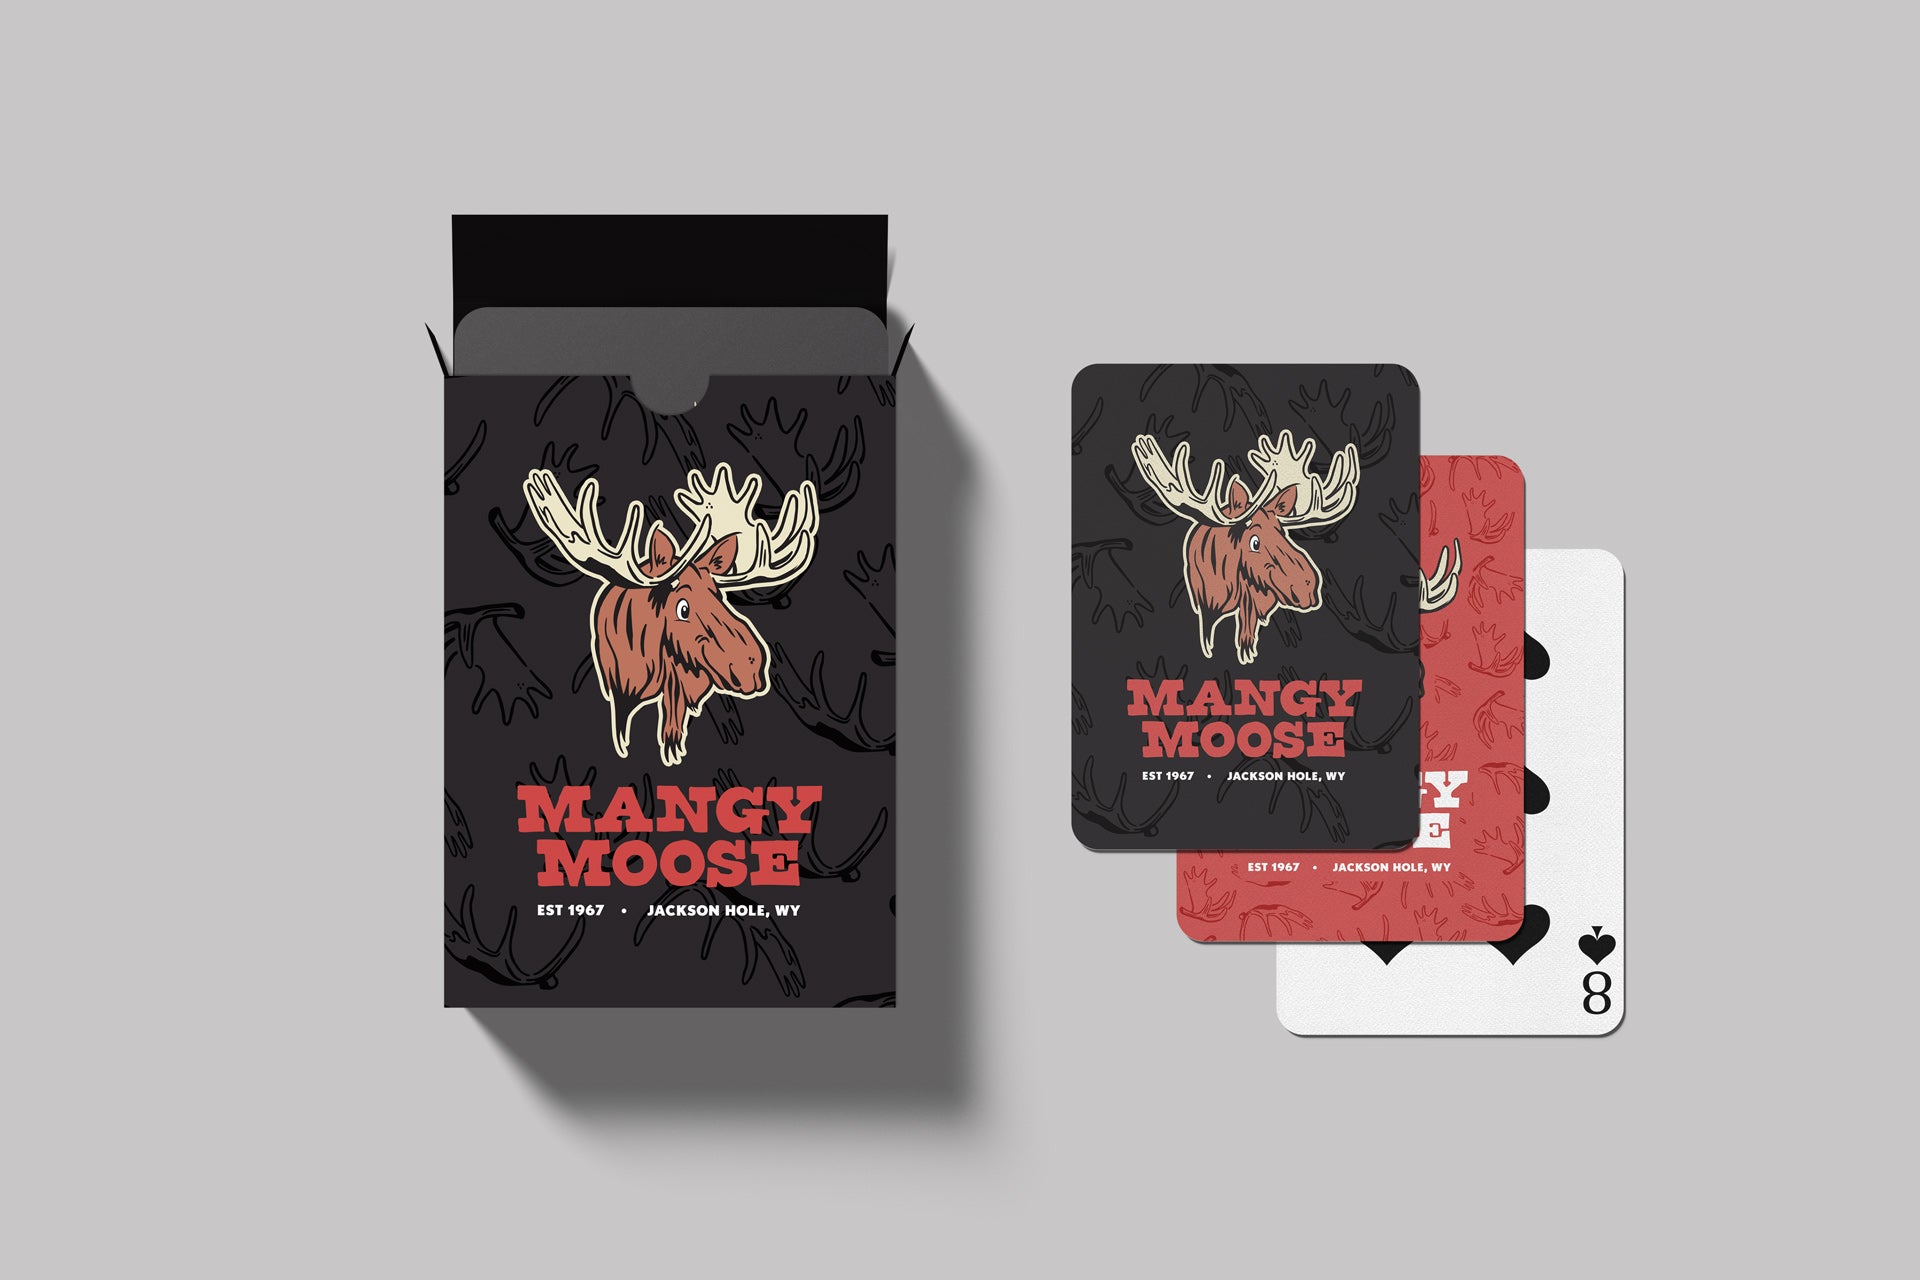 Mangy Moose Accessories - The Mangy Moose